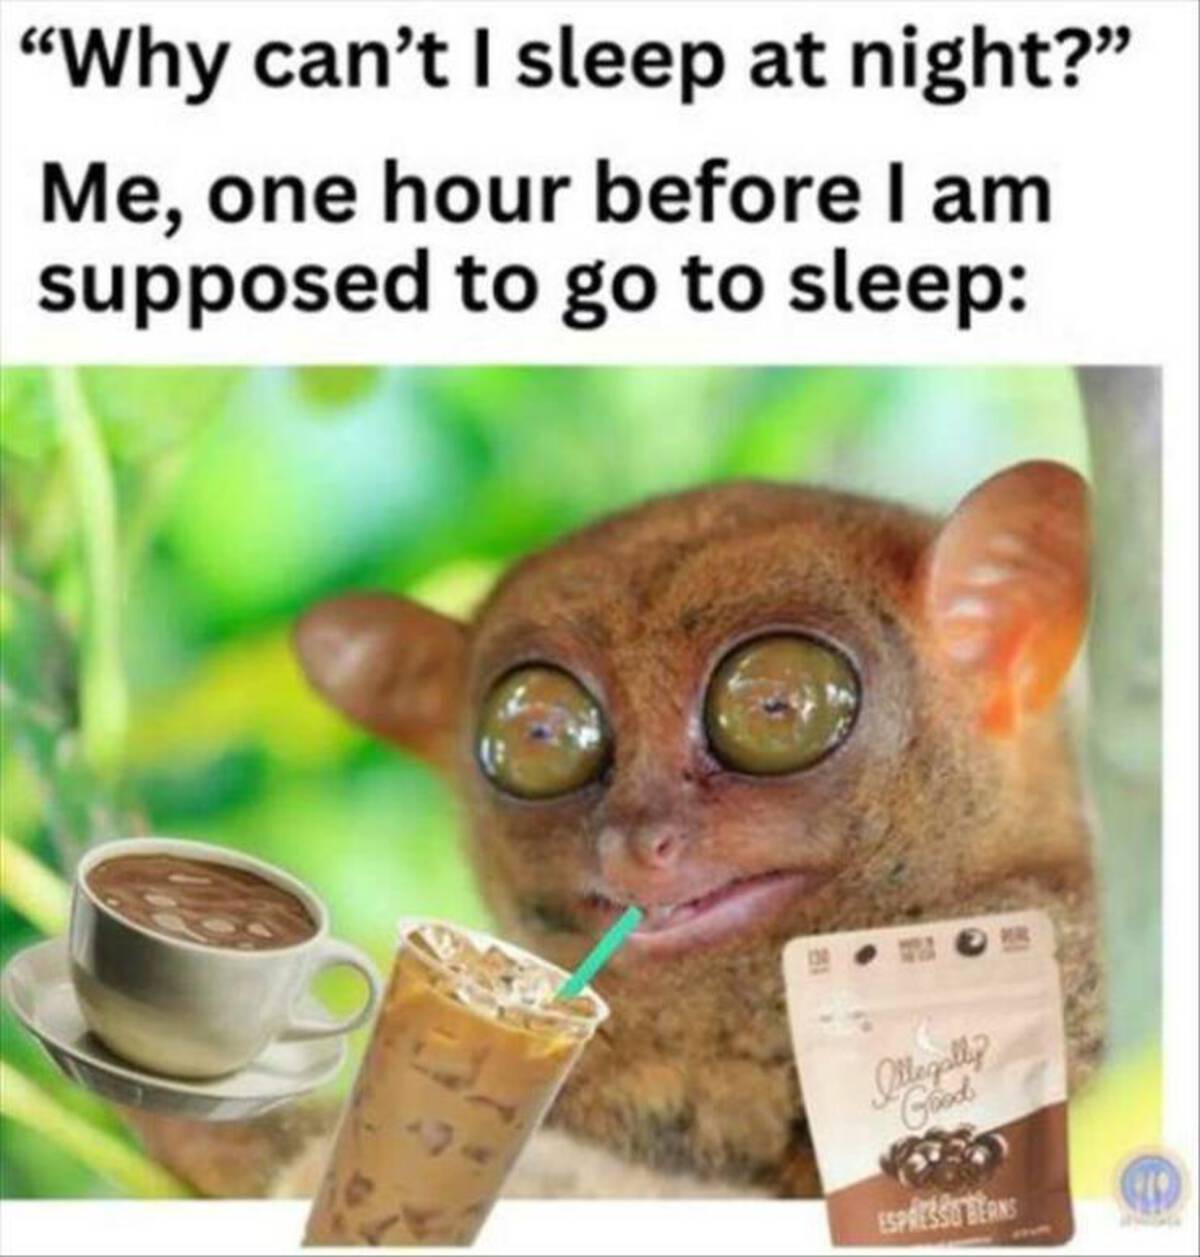 fauna - "Why can't I sleep at night?" Me, one hour before I am supposed to go to sleep Illegally Good Espresso Berns